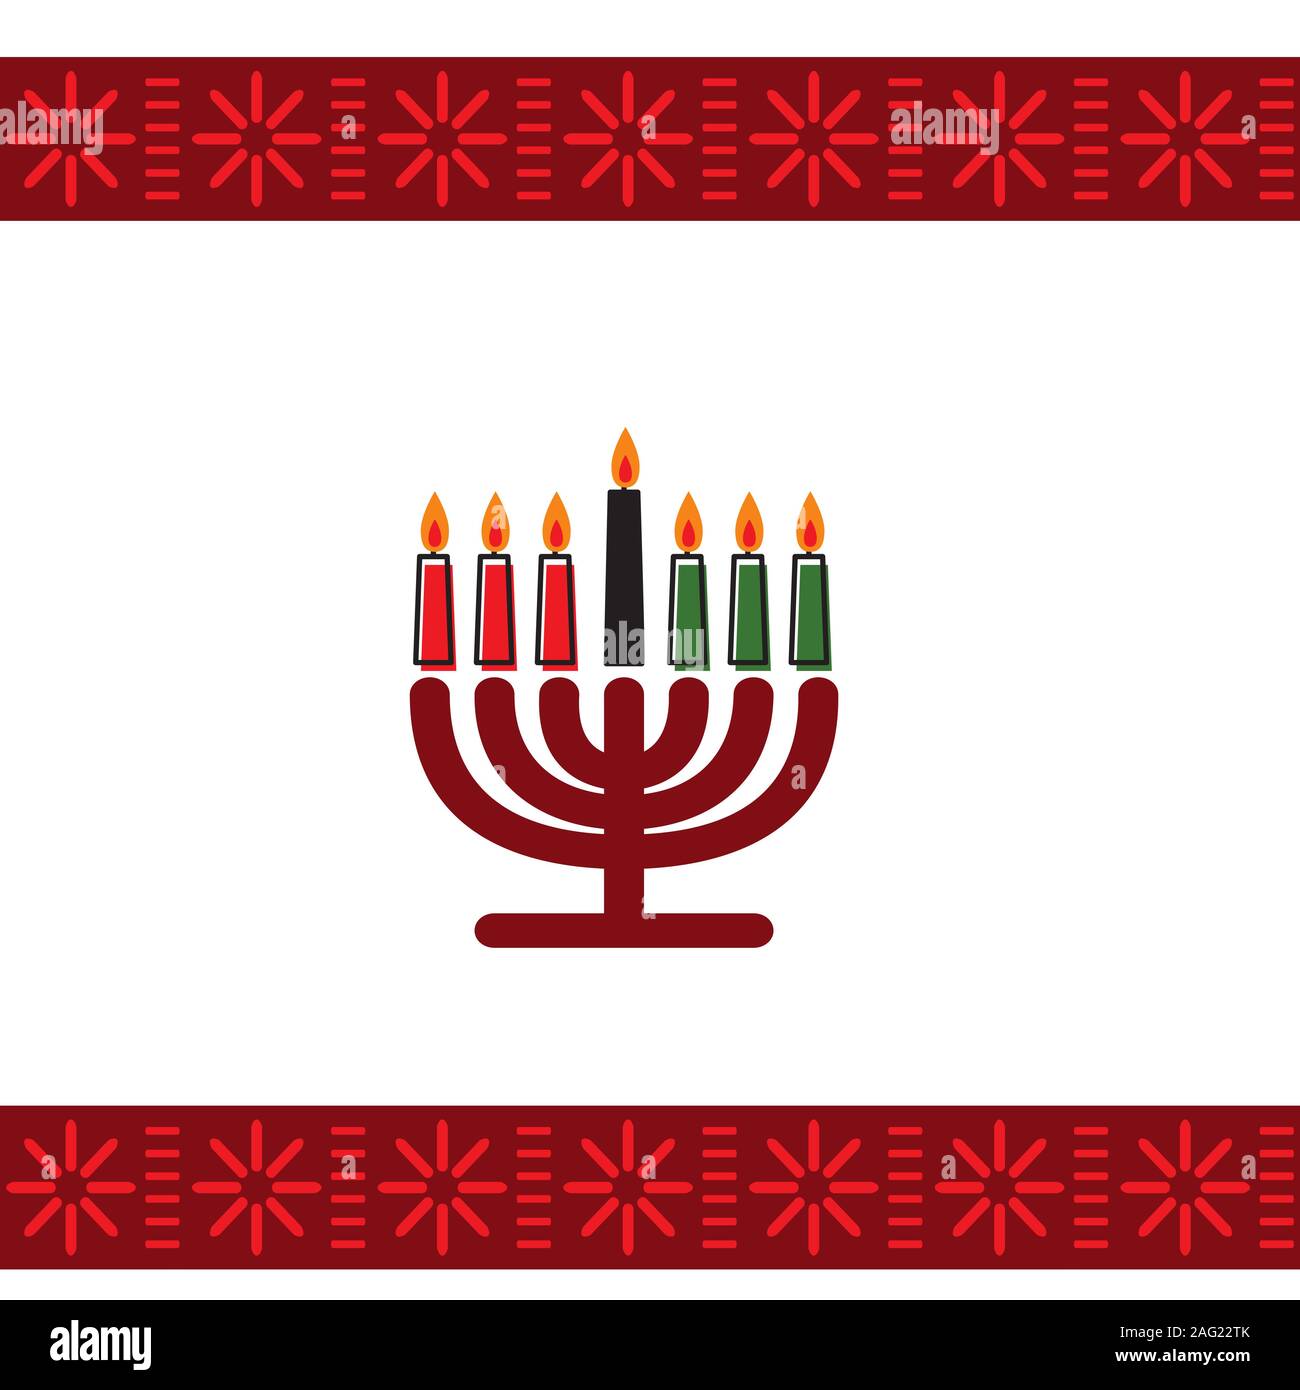 Kwanzaa holidays vector illustration. Greeting card with kinara and traditional colored candles Stock Vector